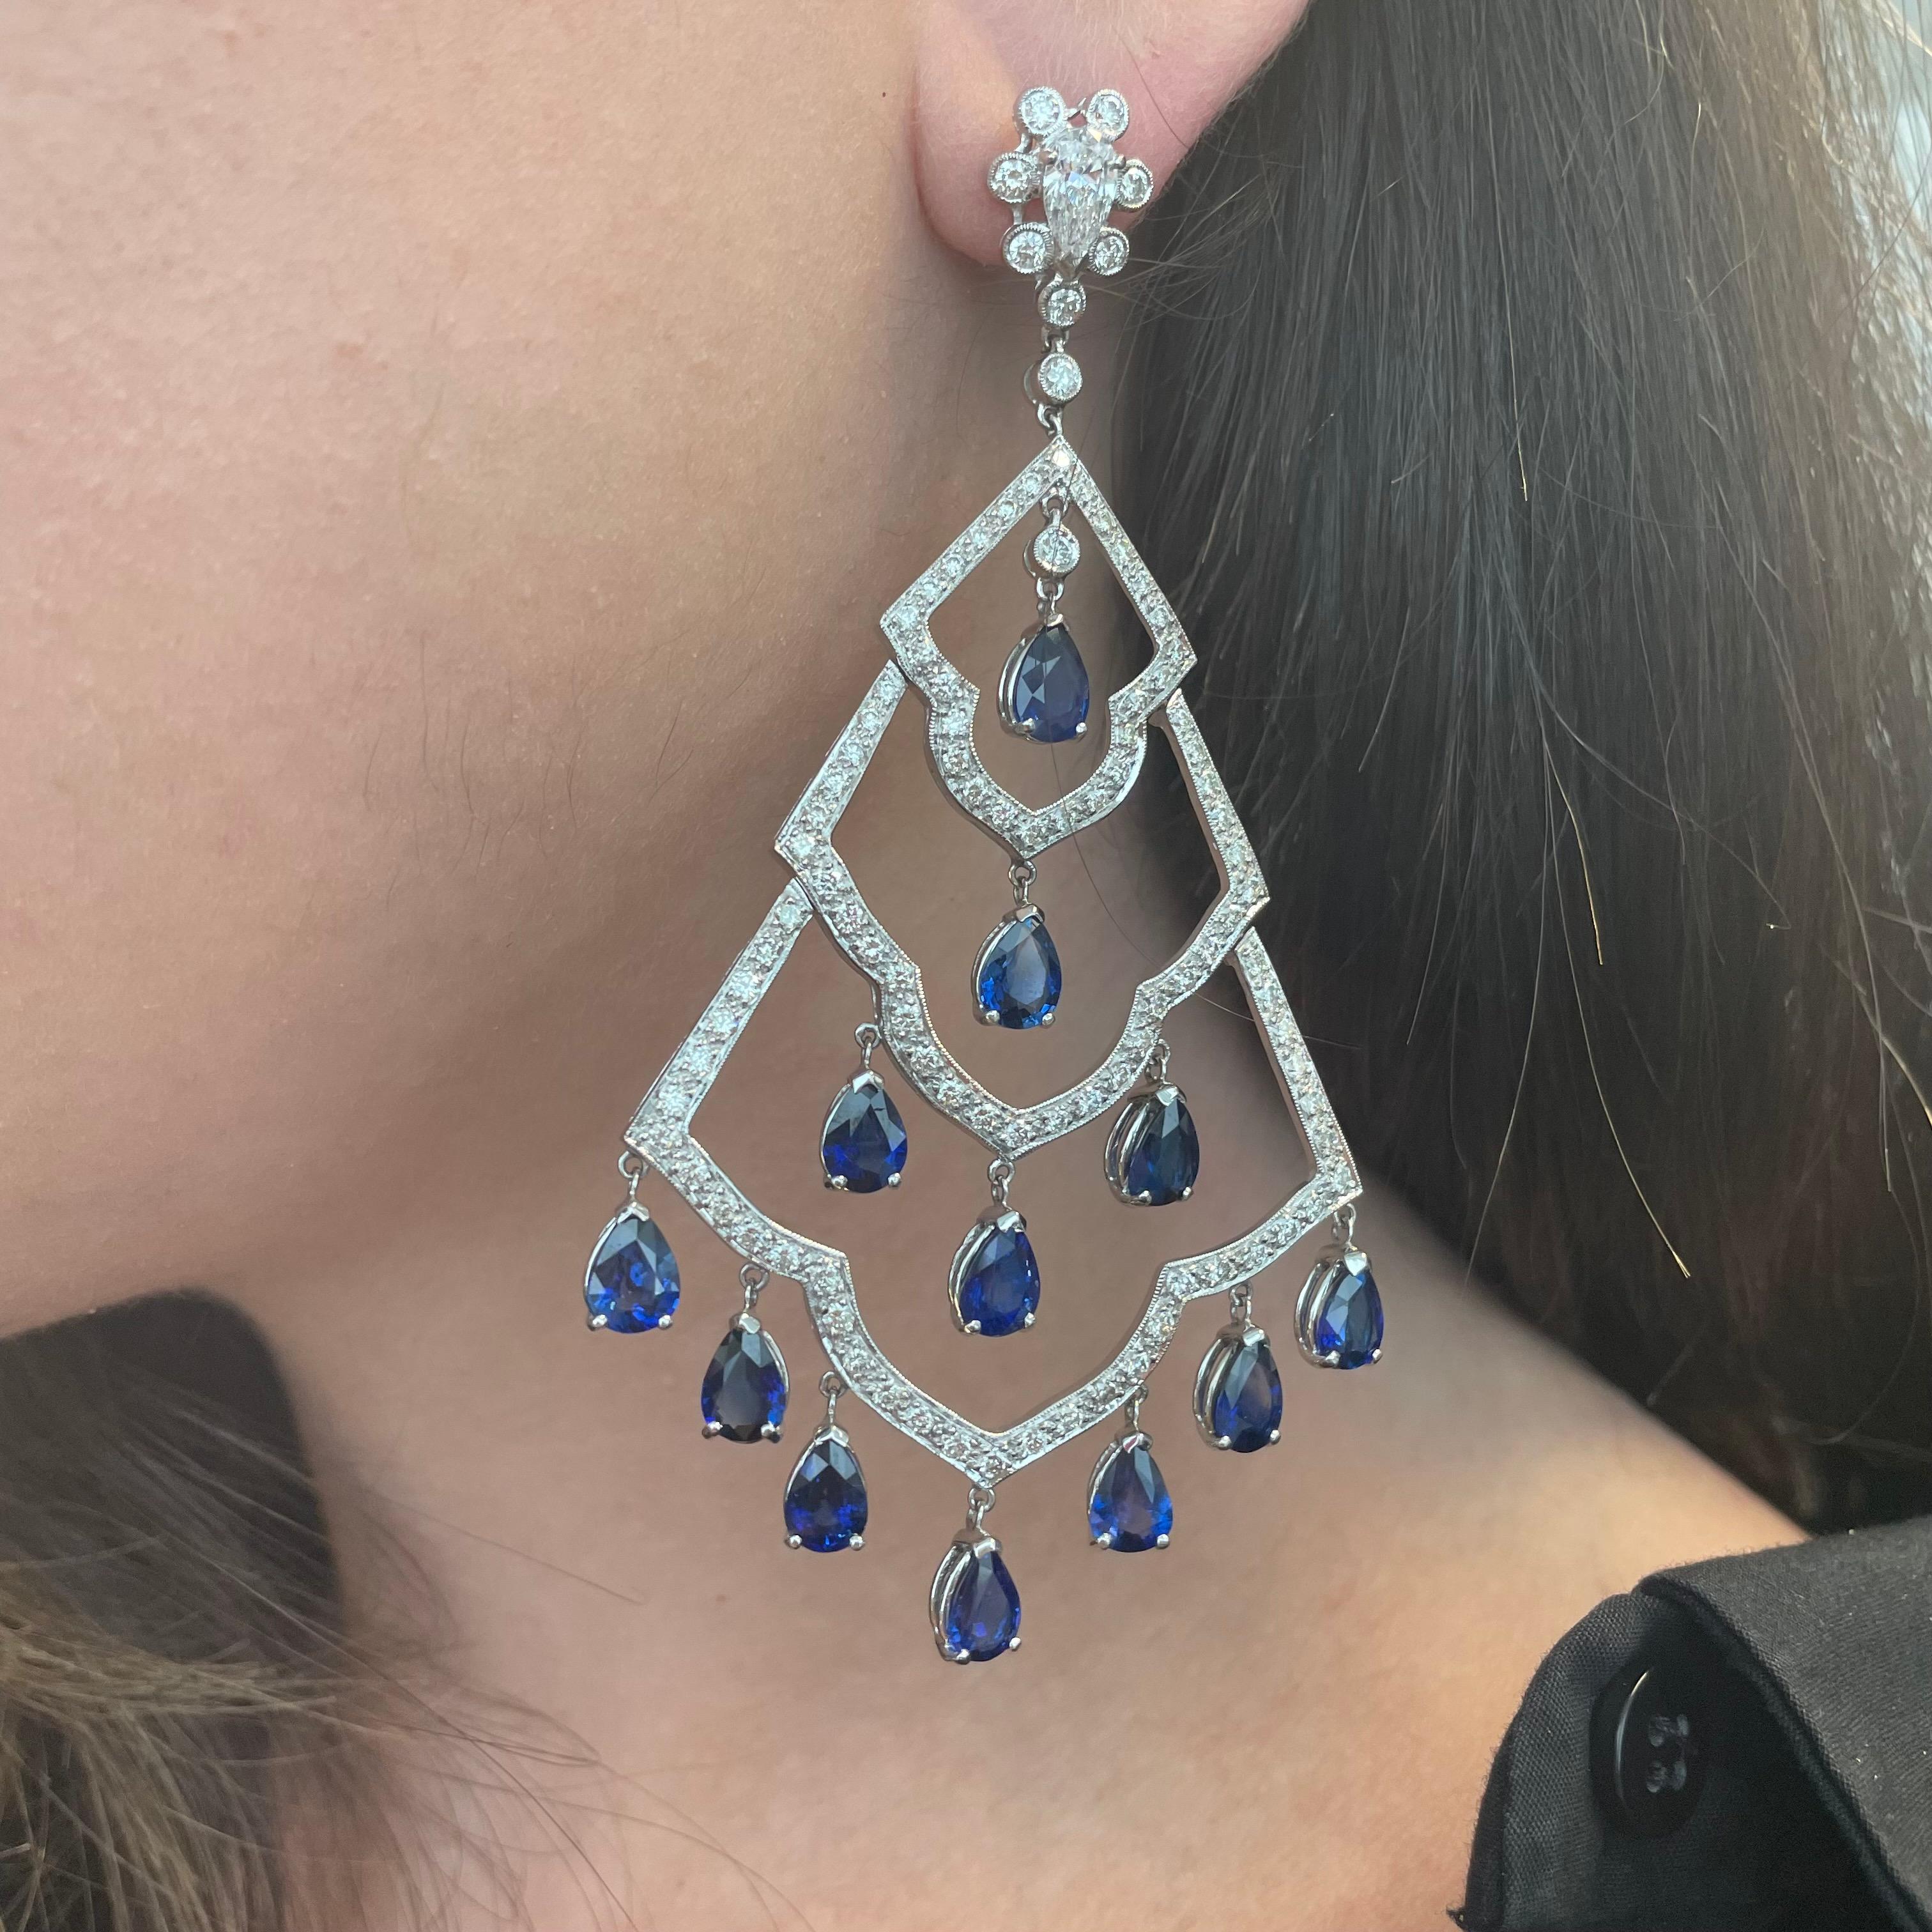 Stunning sapphire and diamond chandelier earrings.
24 pear shape sapphires heat, 18.10 carats. Complimented by 2 pear cut and round brilliant diamonds, 4.26 carats. Approximately G/H color grade and SI clarity grade. Prong set with milgrain work,